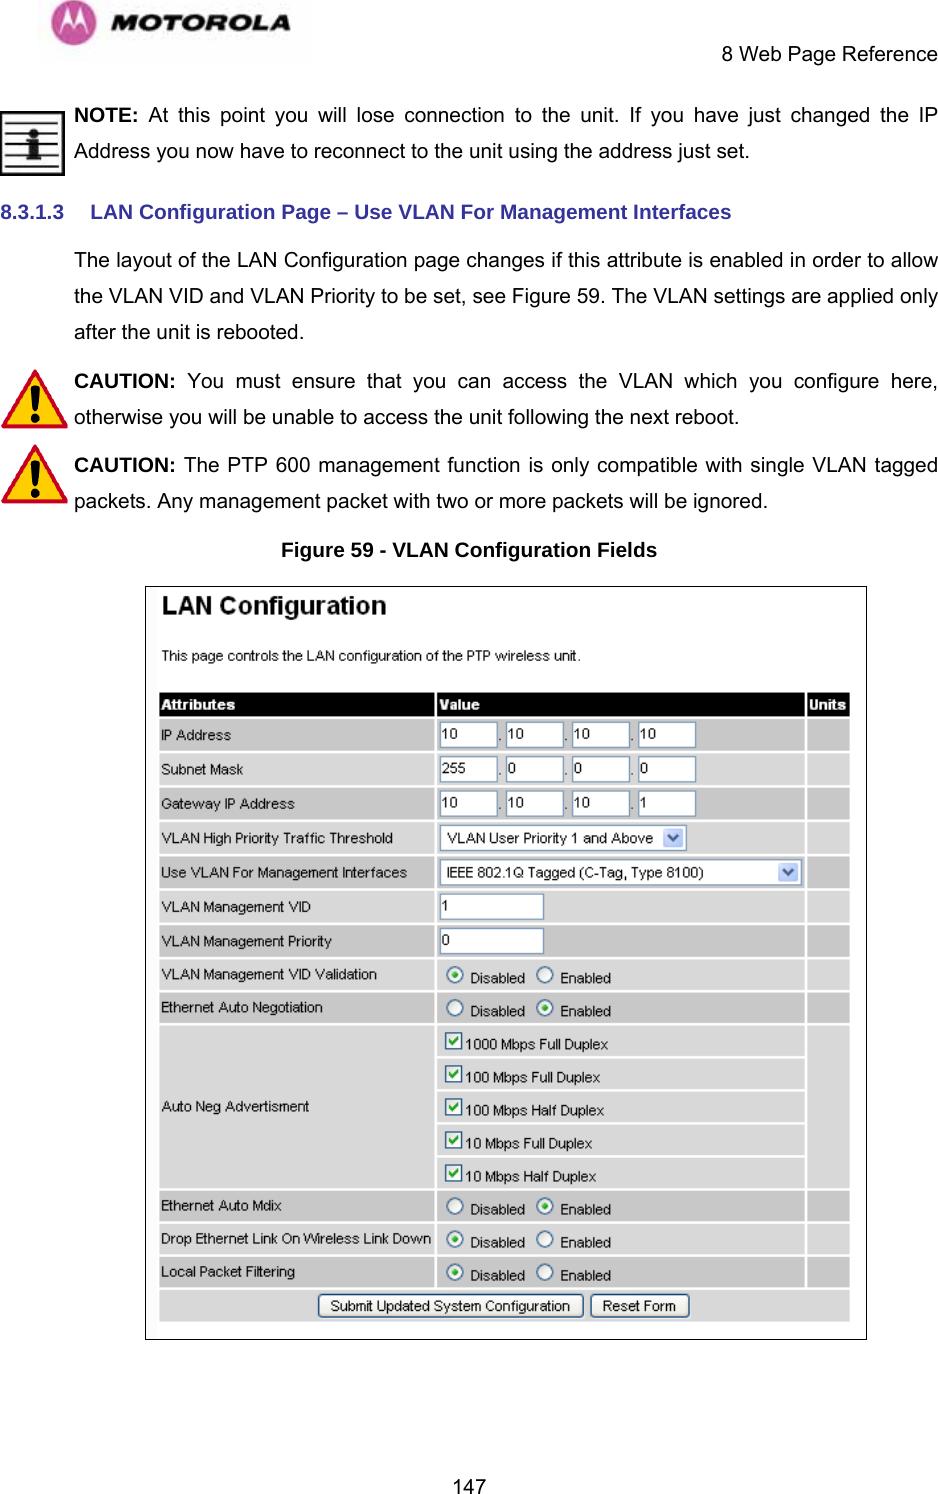     8 Web Page Reference  147NOTE: At this point you will lose connection to the unit. If you have just changed the IP Address you now have to reconnect to the unit using the address just set. 8.3.1.3  LAN Configuration Page – Use VLAN For Management Interfaces The layout of the LAN Configuration page changes if this attribute is enabled in order to allow the VLAN VID and VLAN Priority to be set, see Figure 59. The VLAN settings are applied only after the unit is rebooted. CAUTION:  You must ensure that you can access the VLAN which you configure here, otherwise you will be unable to access the unit following the next reboot. CAUTION: The PTP 600 management function is only compatible with single VLAN tagged packets. Any management packet with two or more packets will be ignored. Figure 59 - VLAN Configuration Fields   